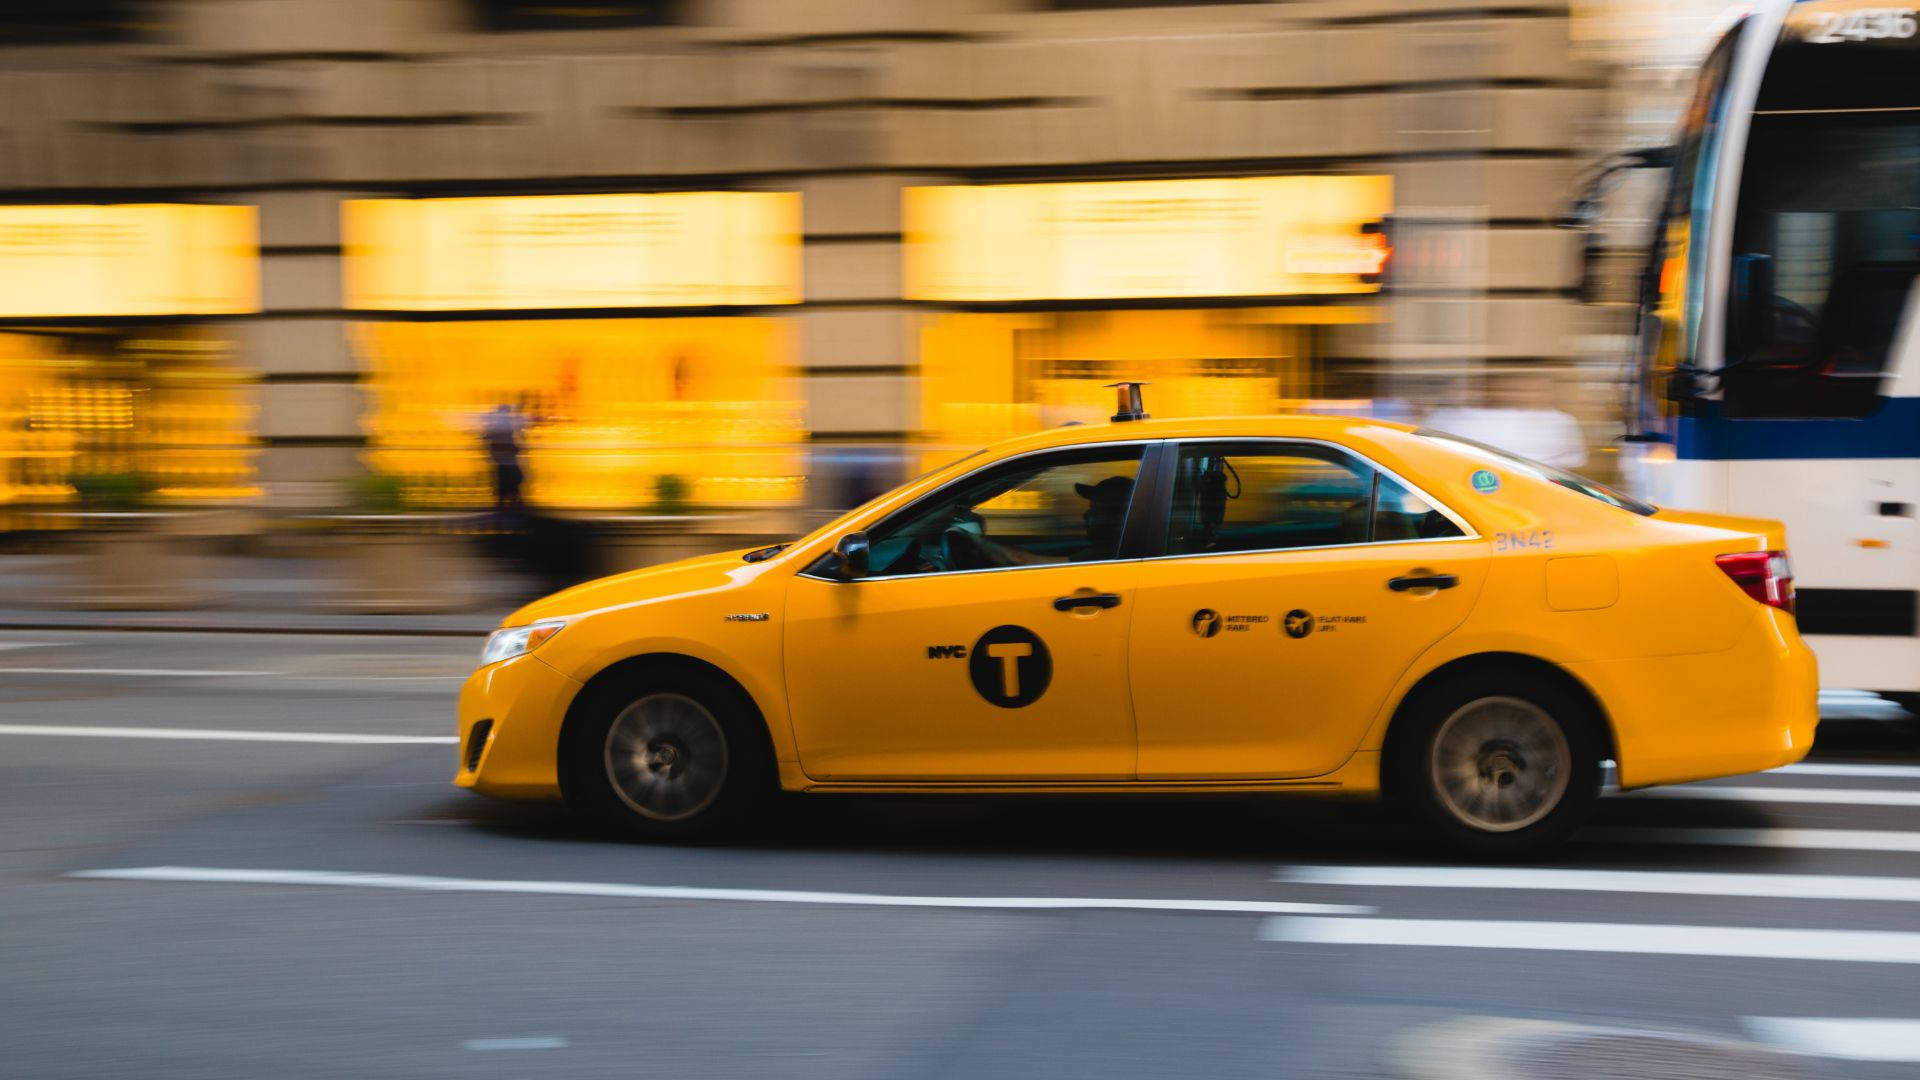 Yellow Taxi Cab Motion Blur Wallpaper